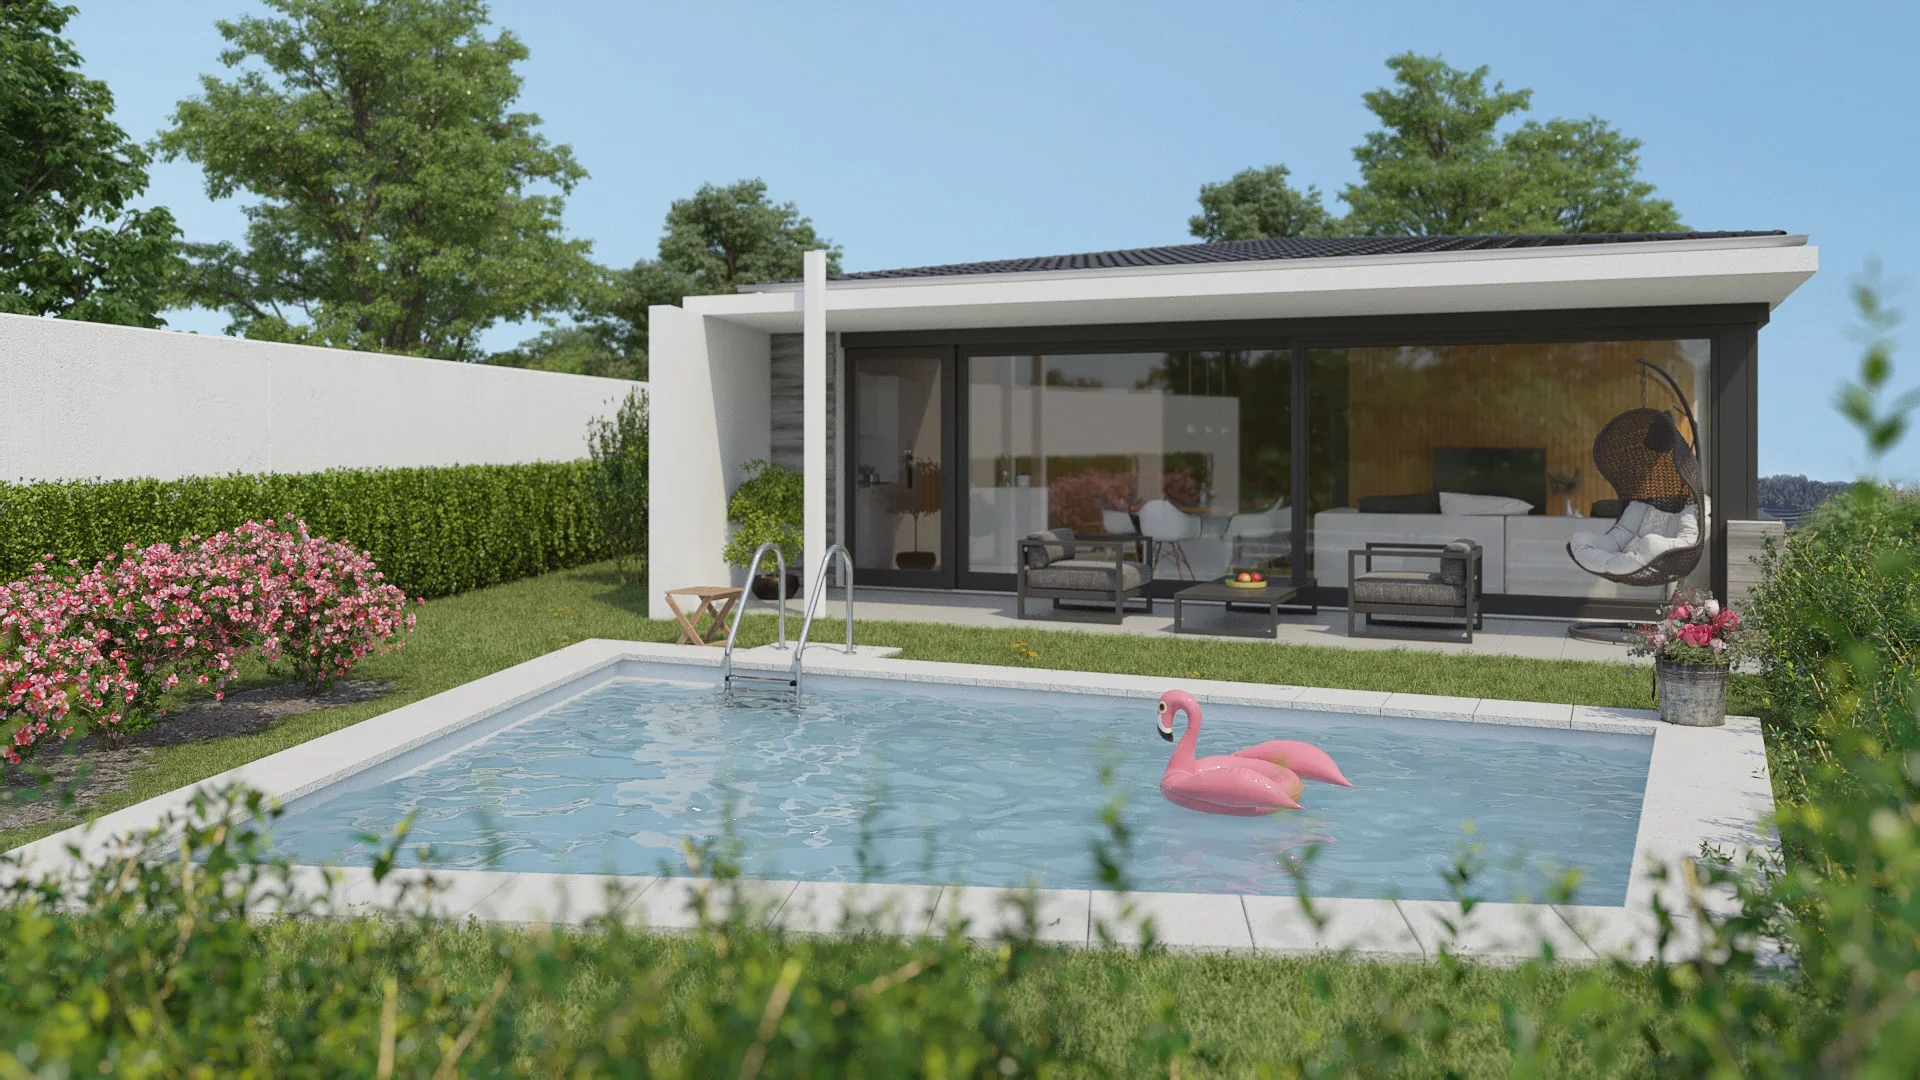 Architectural visualization. Detached house. View of a pool